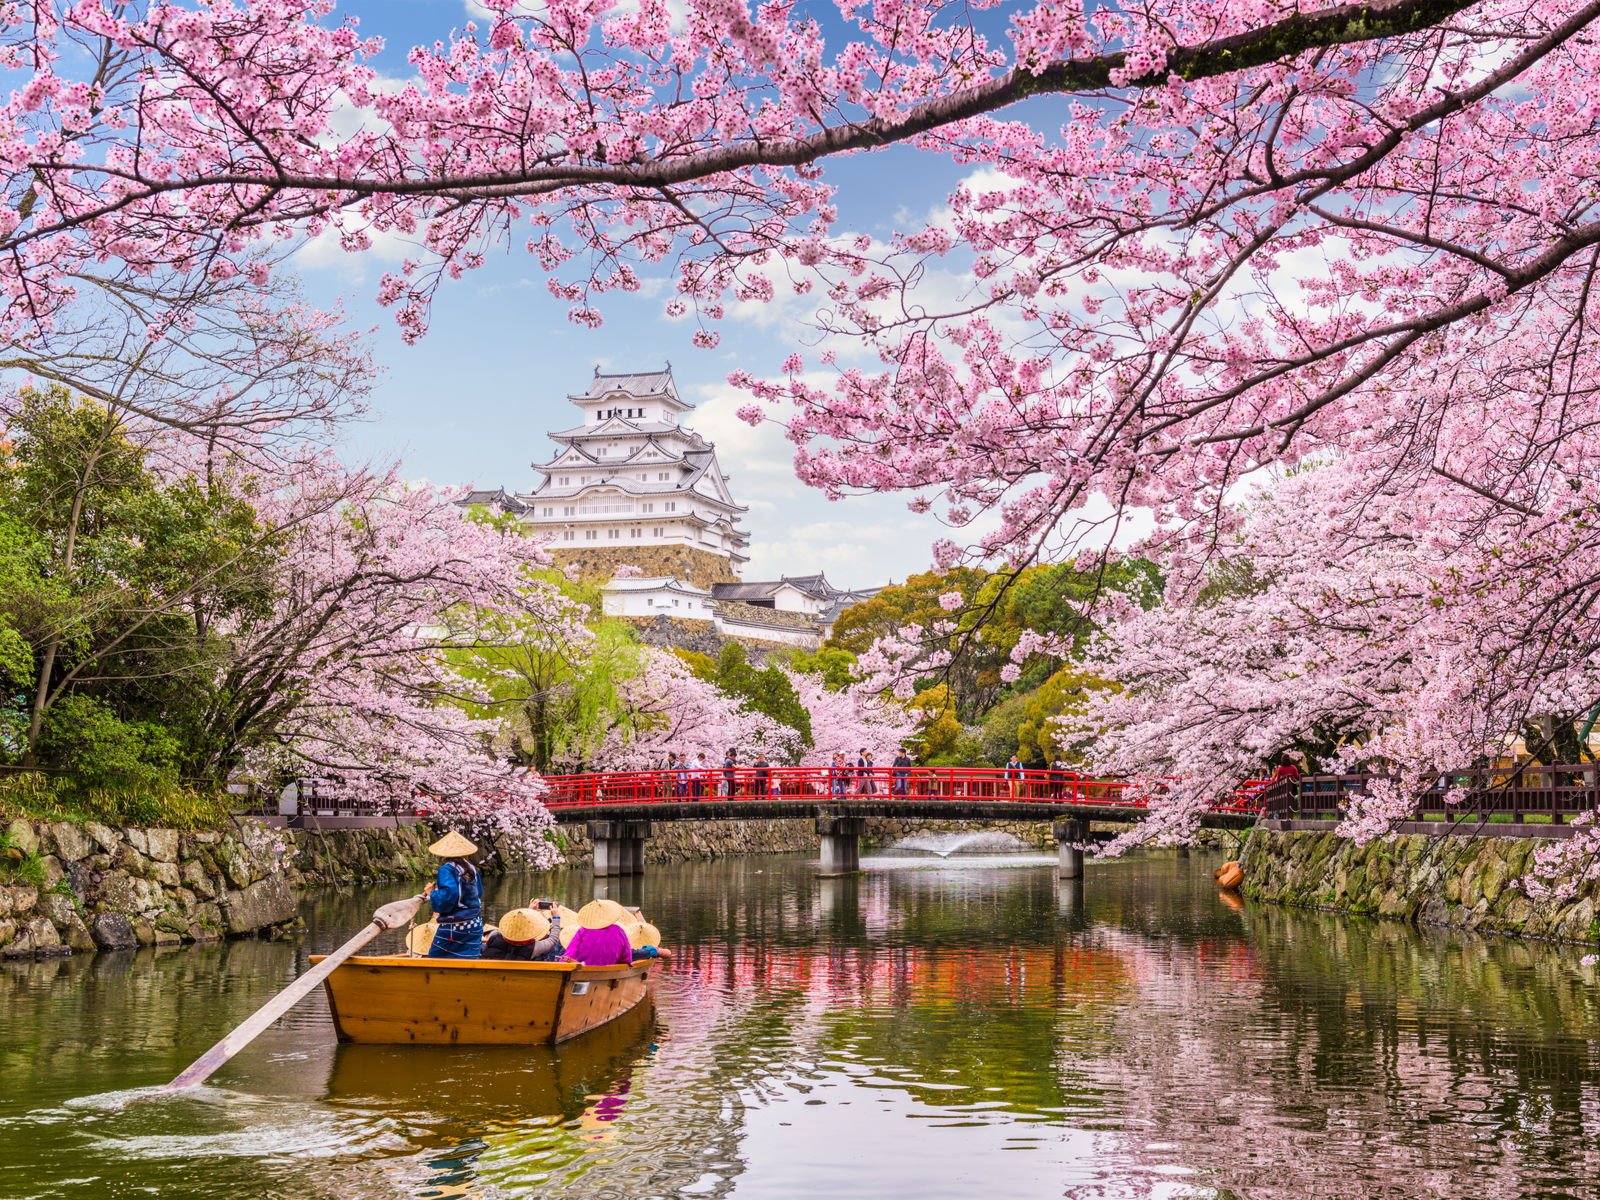 Gorgeous spring blooms on a lake in one of the best places to visit in Japan, Himeji Castle